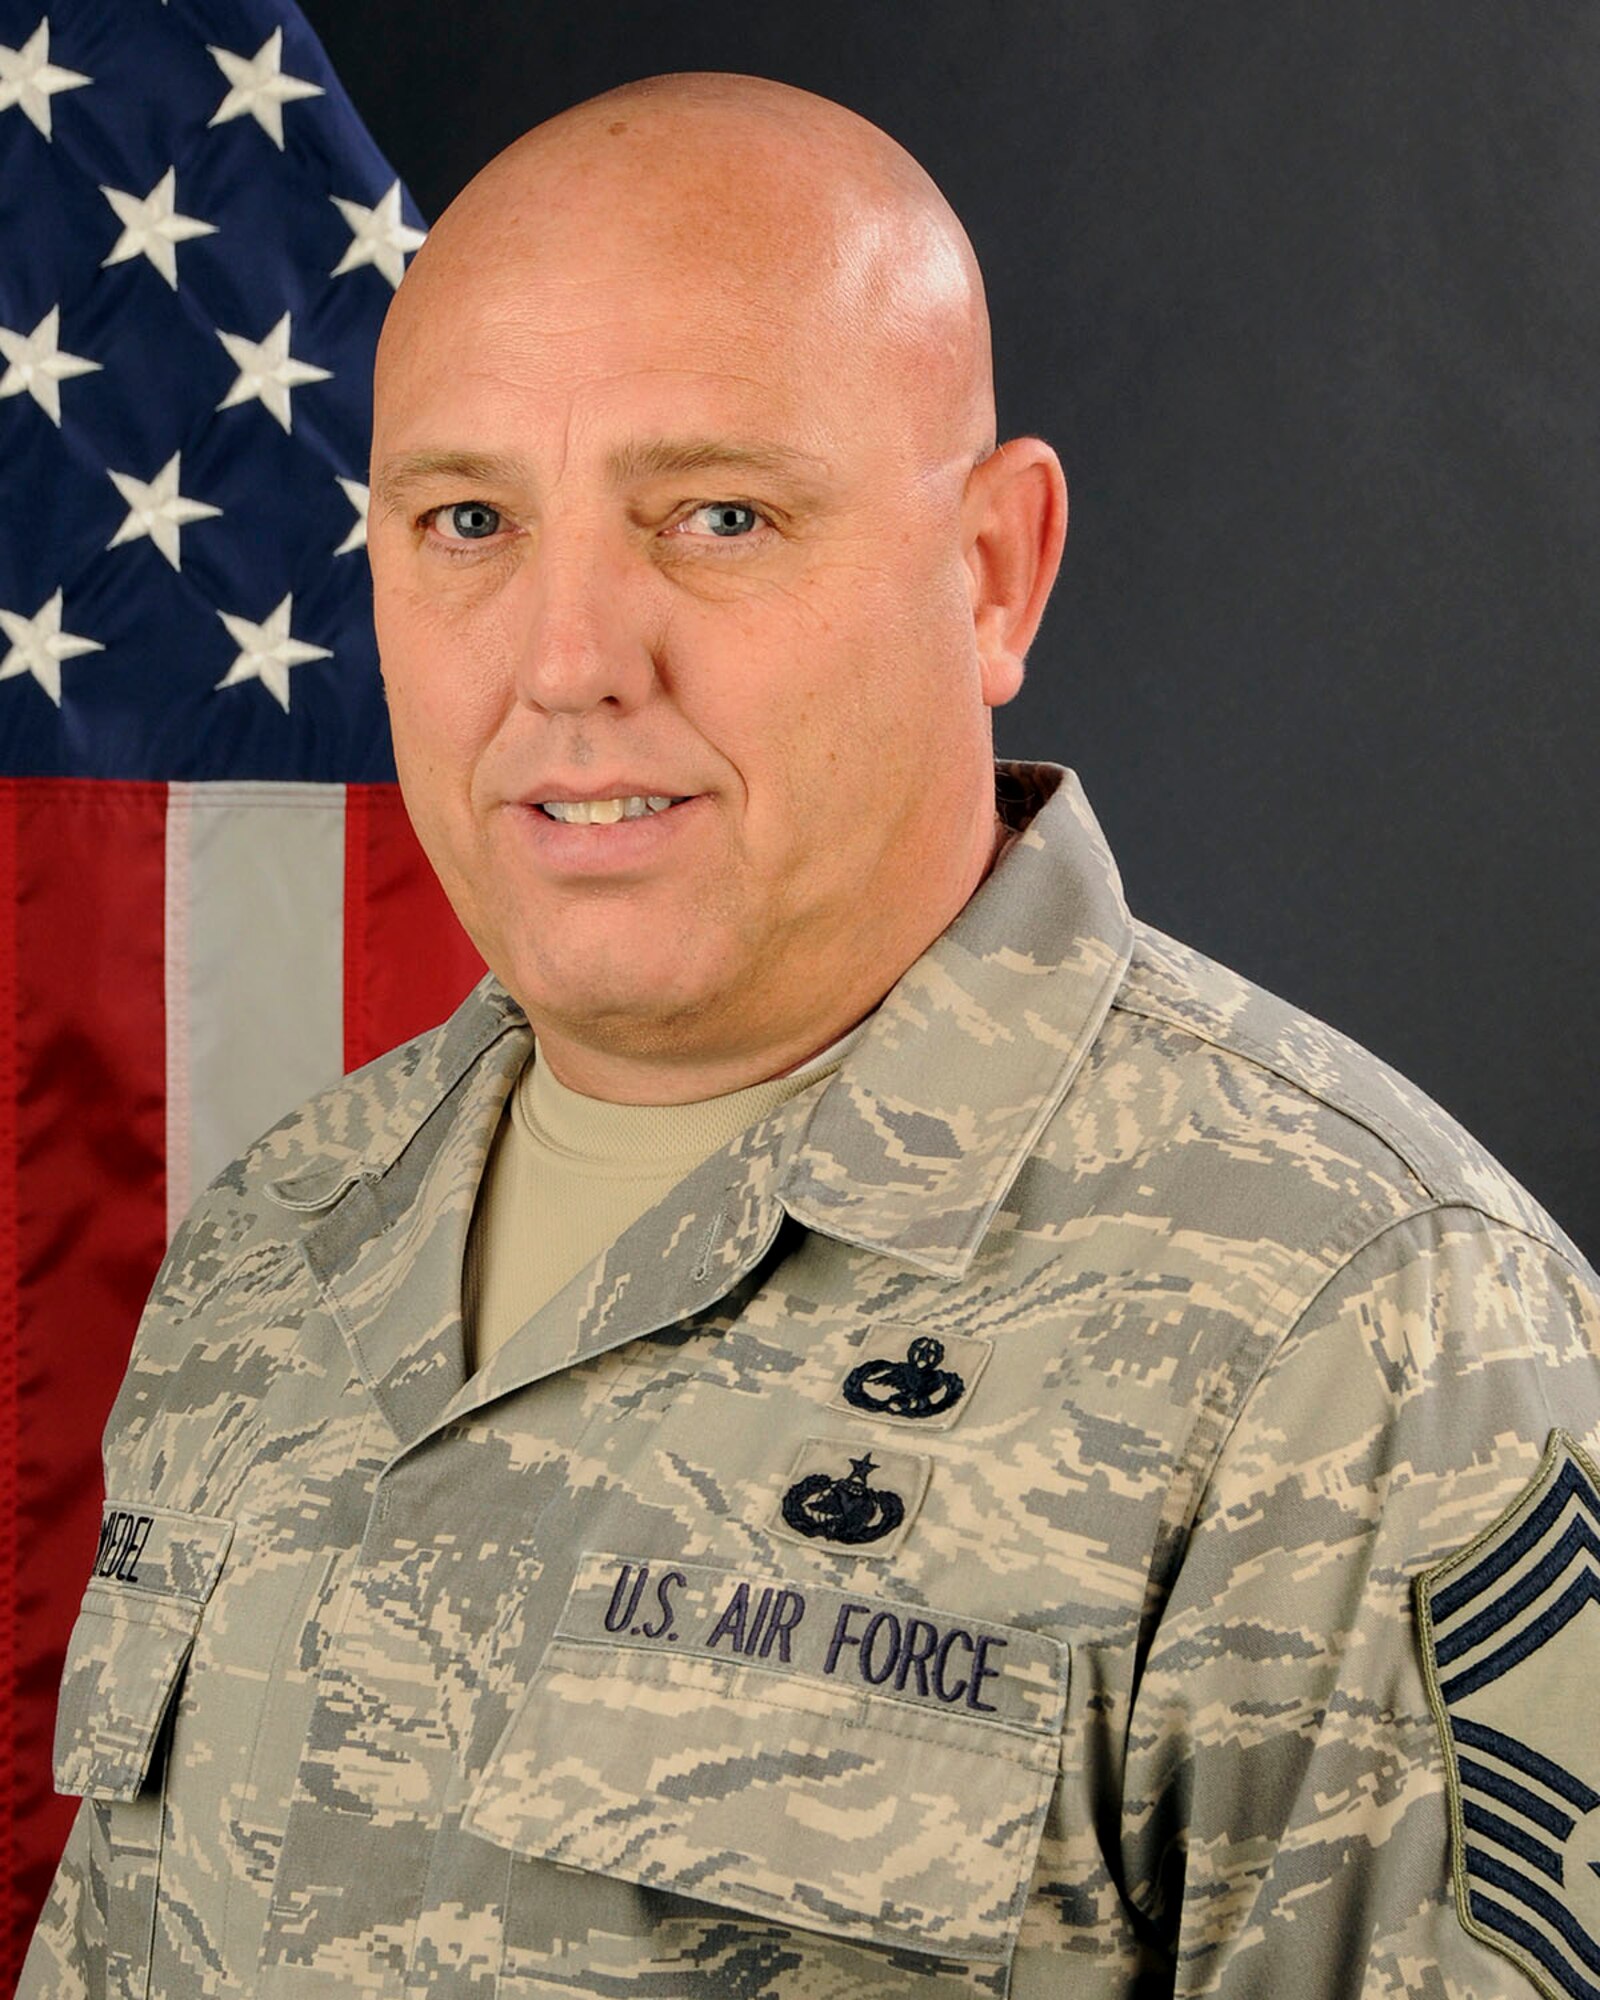 U.S. Air Force Chief Master Sgt. Peter Wiedel, with Joint Forces Headquarters, South Carolina Air National Guard, poses for his portrait, Jan. 22, 2014.   (U.S. Air National Guard photo by Tech. Sgt. Caycee Watson/Released)